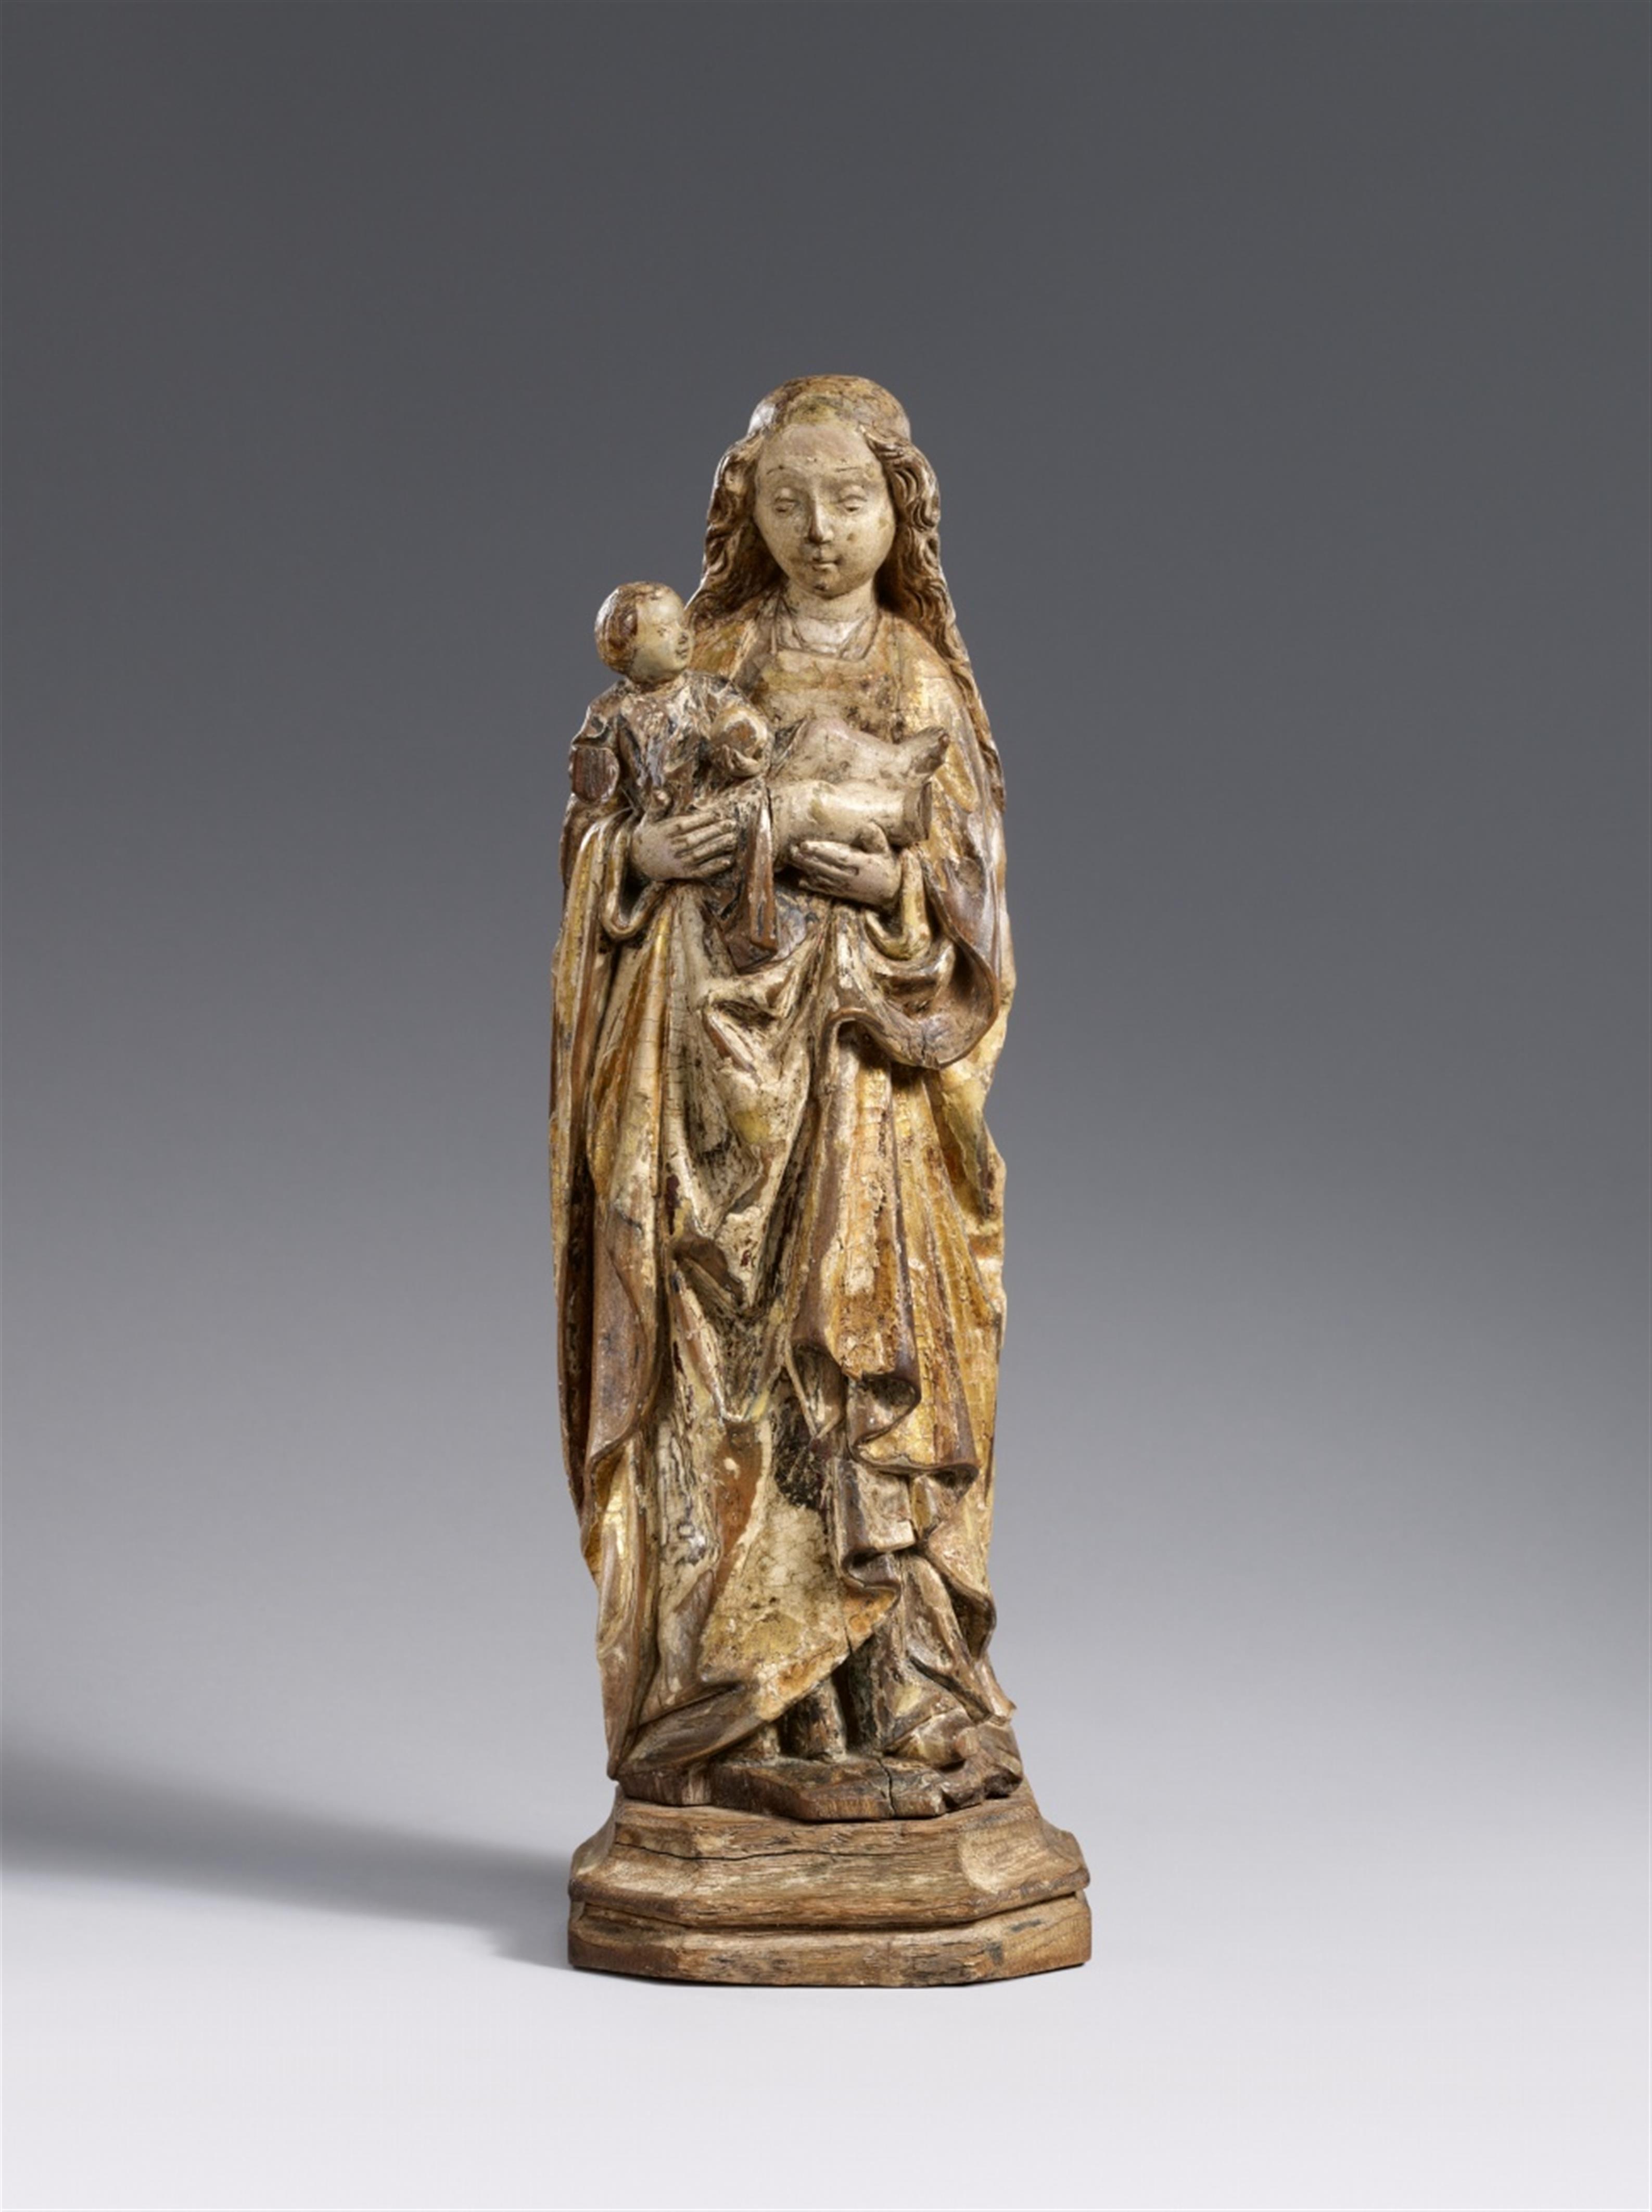 Mechelen, early 16th century - An early 16th century Mechelen carved wood figure of the Virgin with Child - image-1